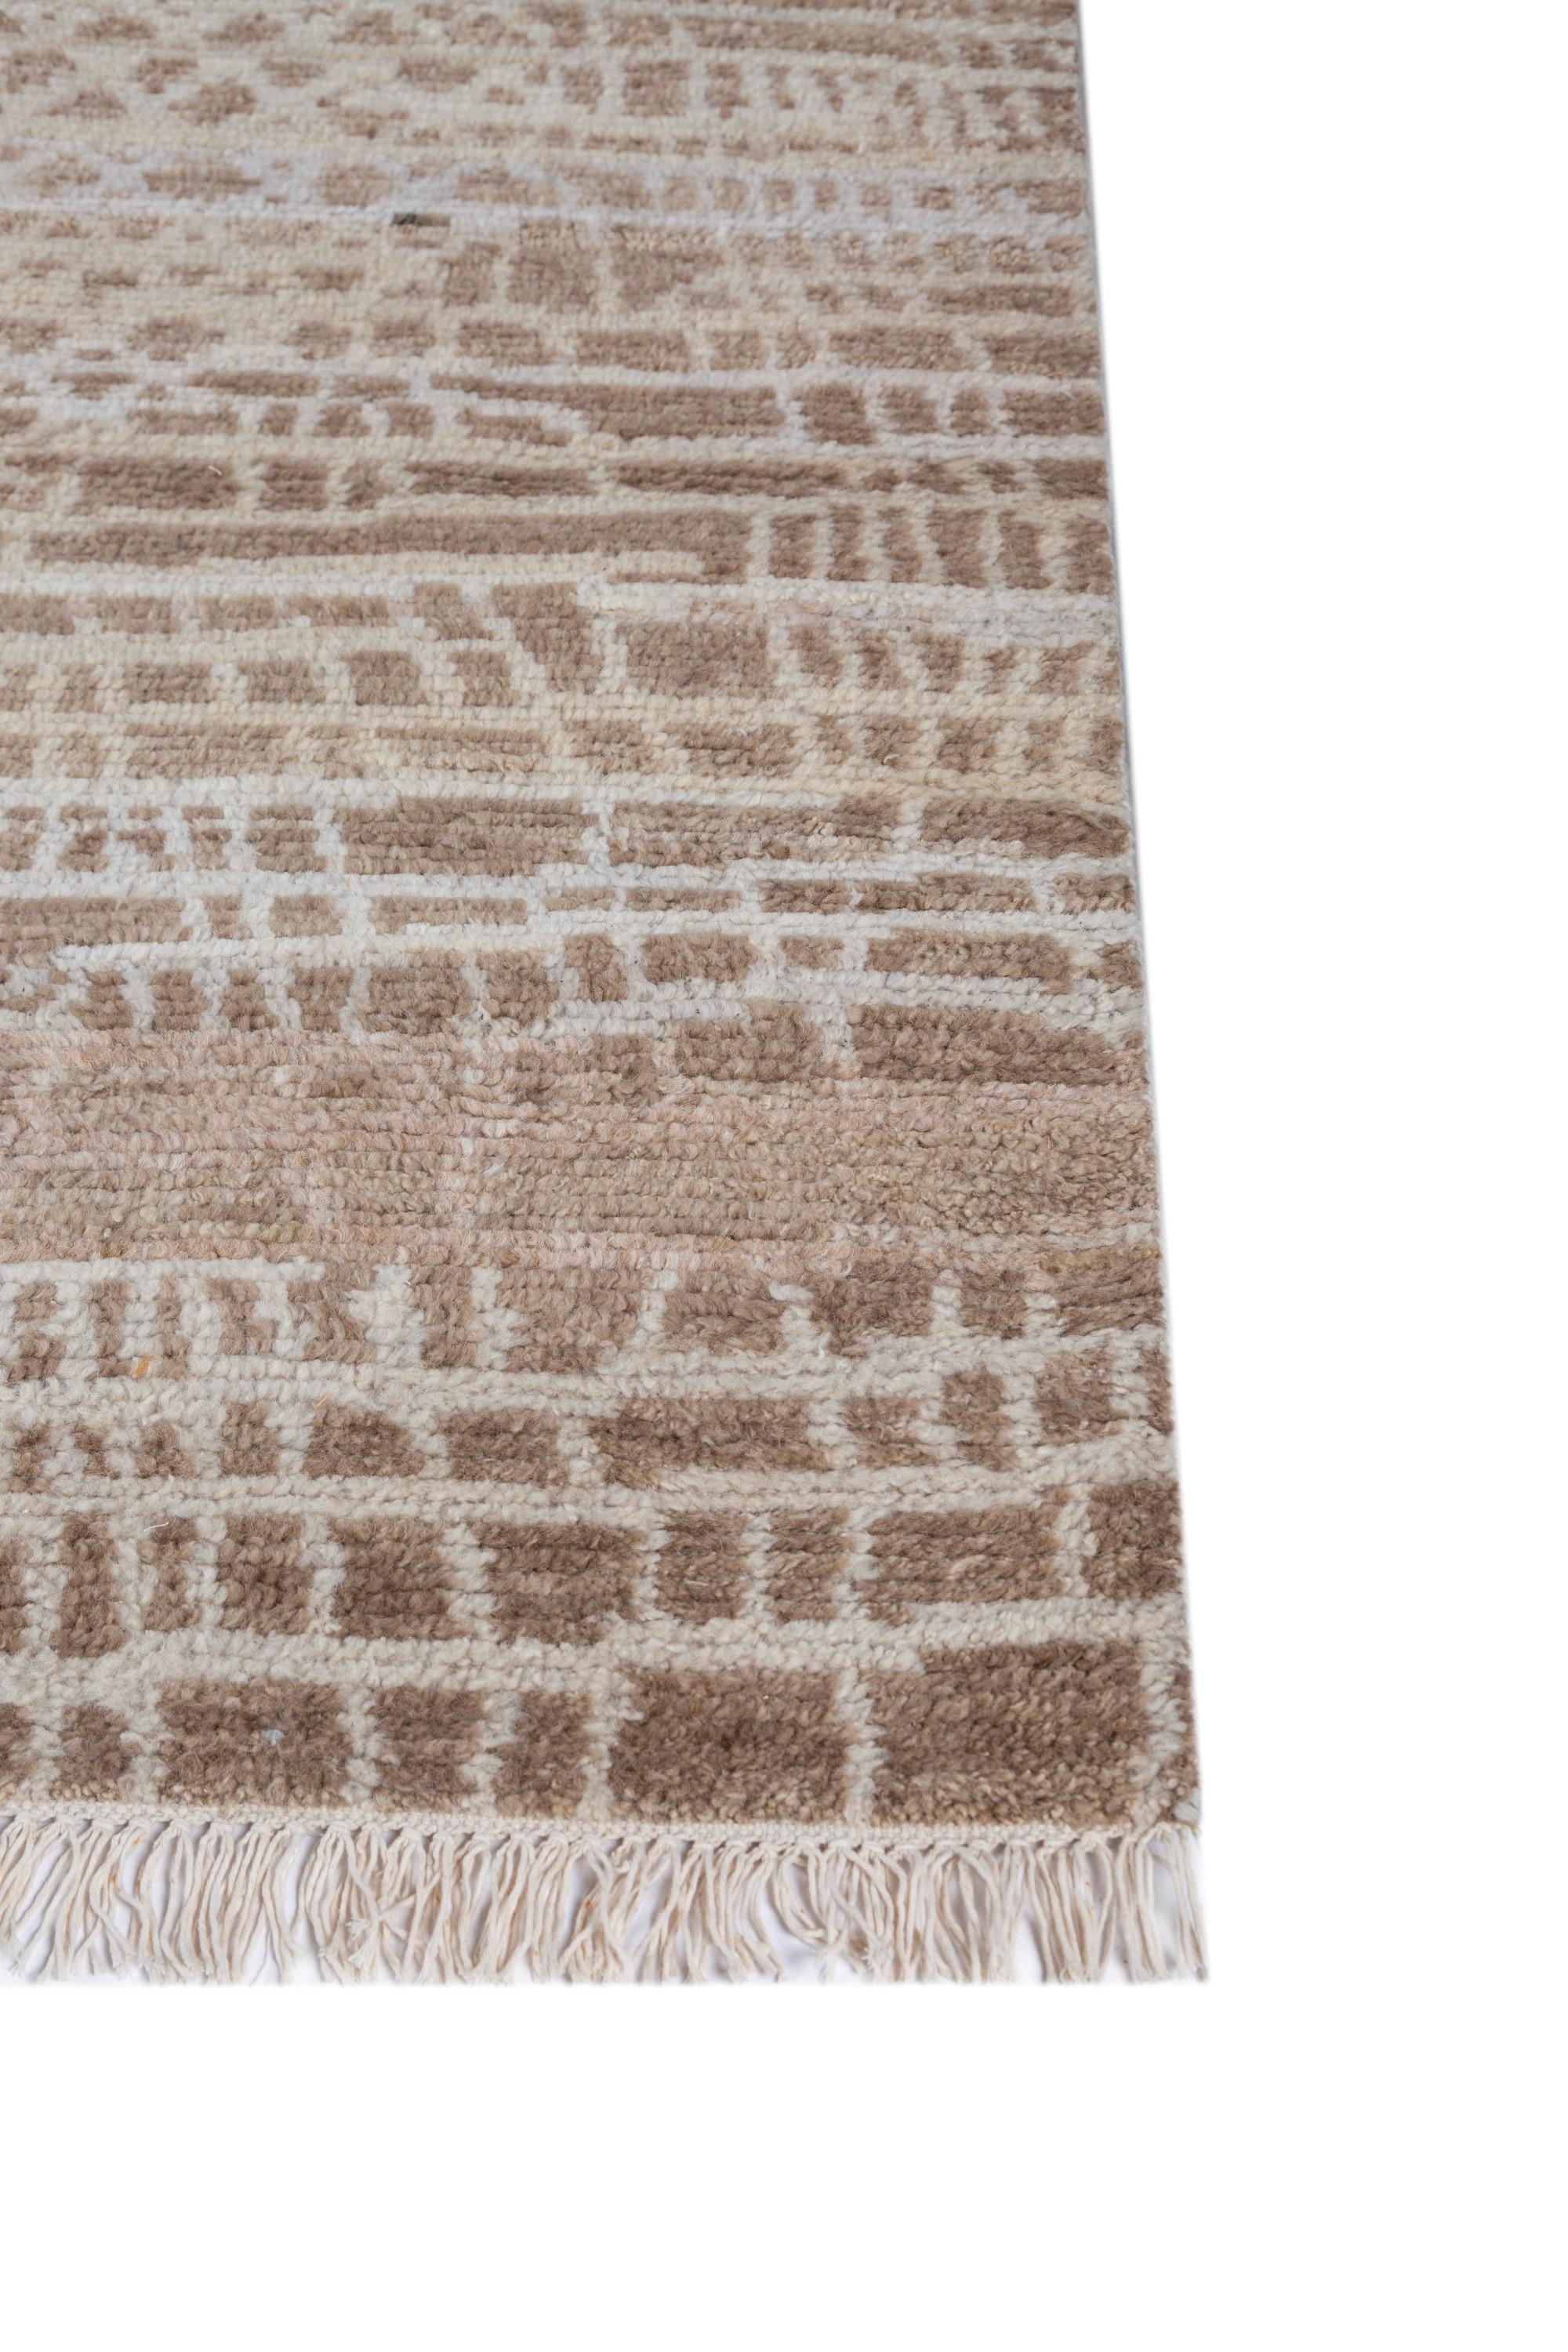 Step into the serene elegance of 'Cobblestone Whispers,' a hand-knotted rug. Much like a stroll on freshly fallen snow, this rug features a ground color of white, with a light peach border resembling the warmth of aged cobblestones. Delicate